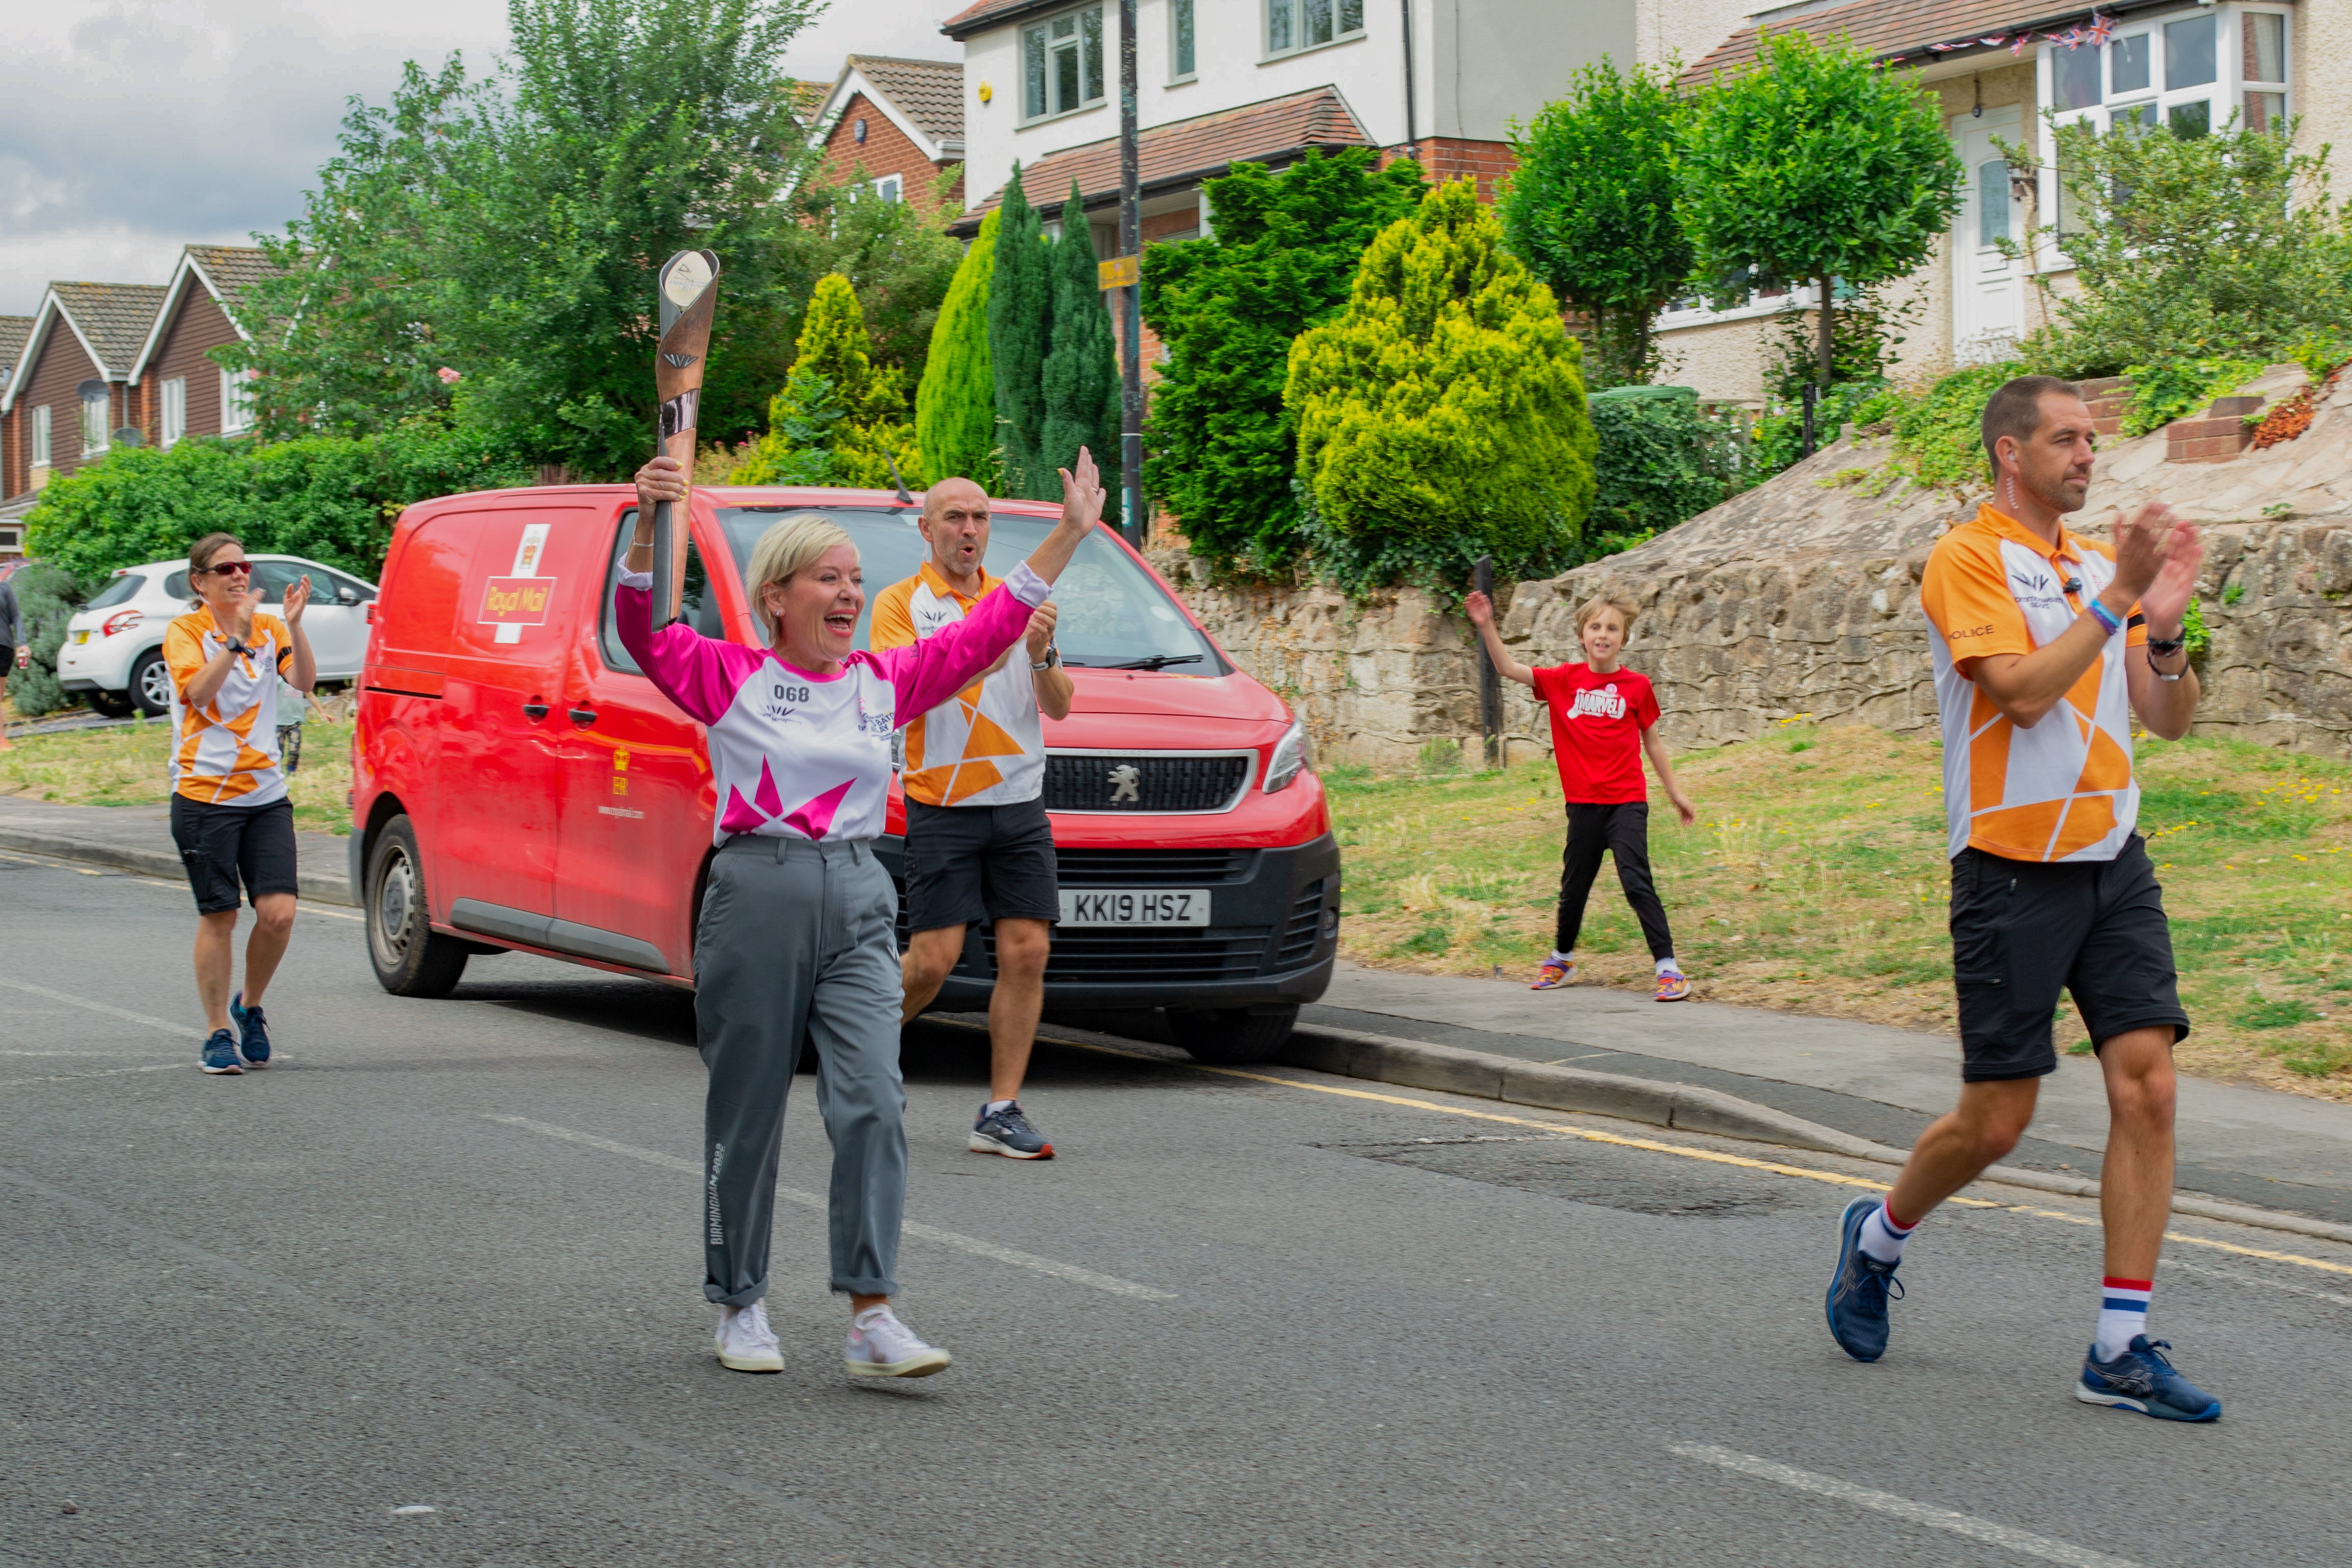 Foundation’s CEO Tina Costello skips for the Queen’s Baton Relay!